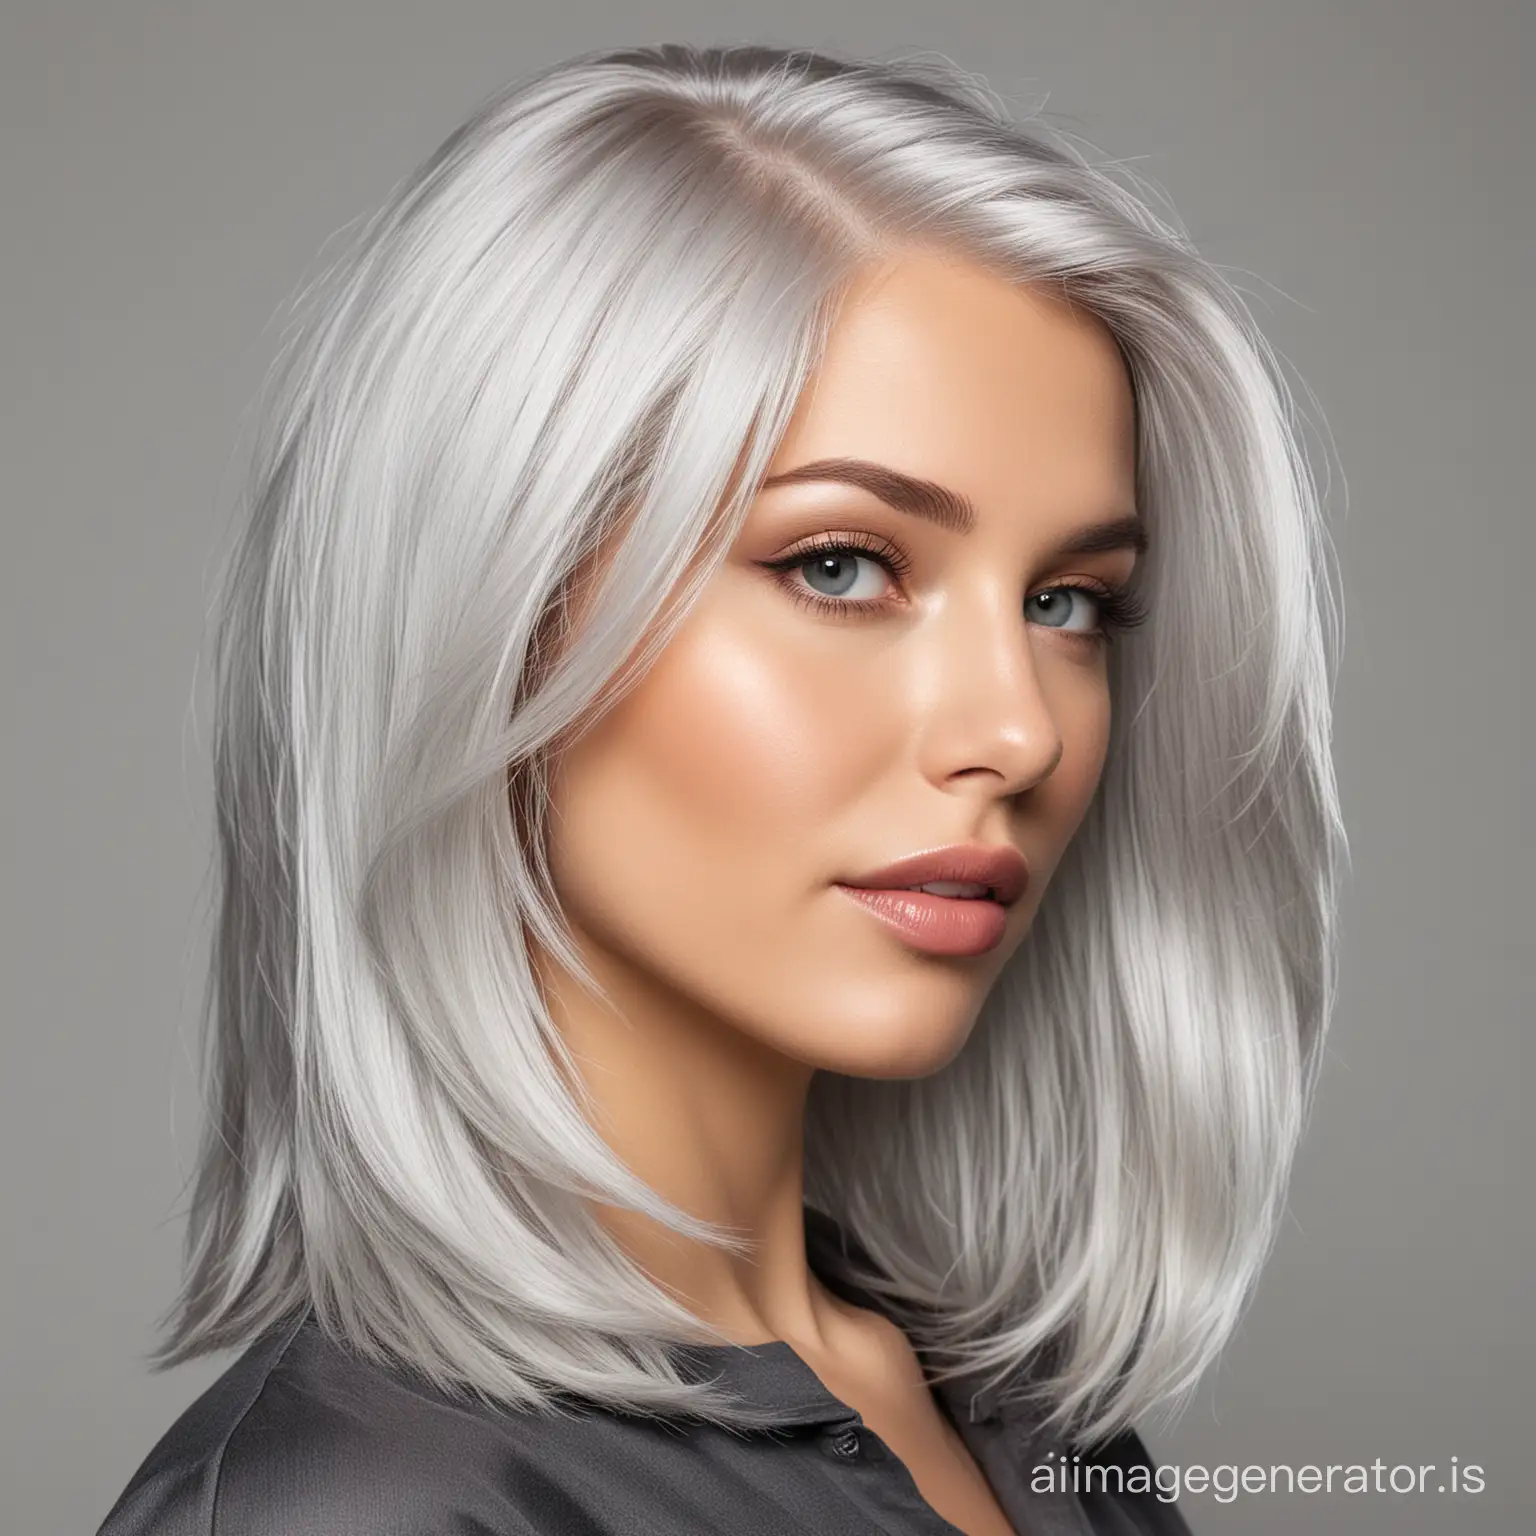 Elegant-Woman-with-Smooth-Silver-Hair